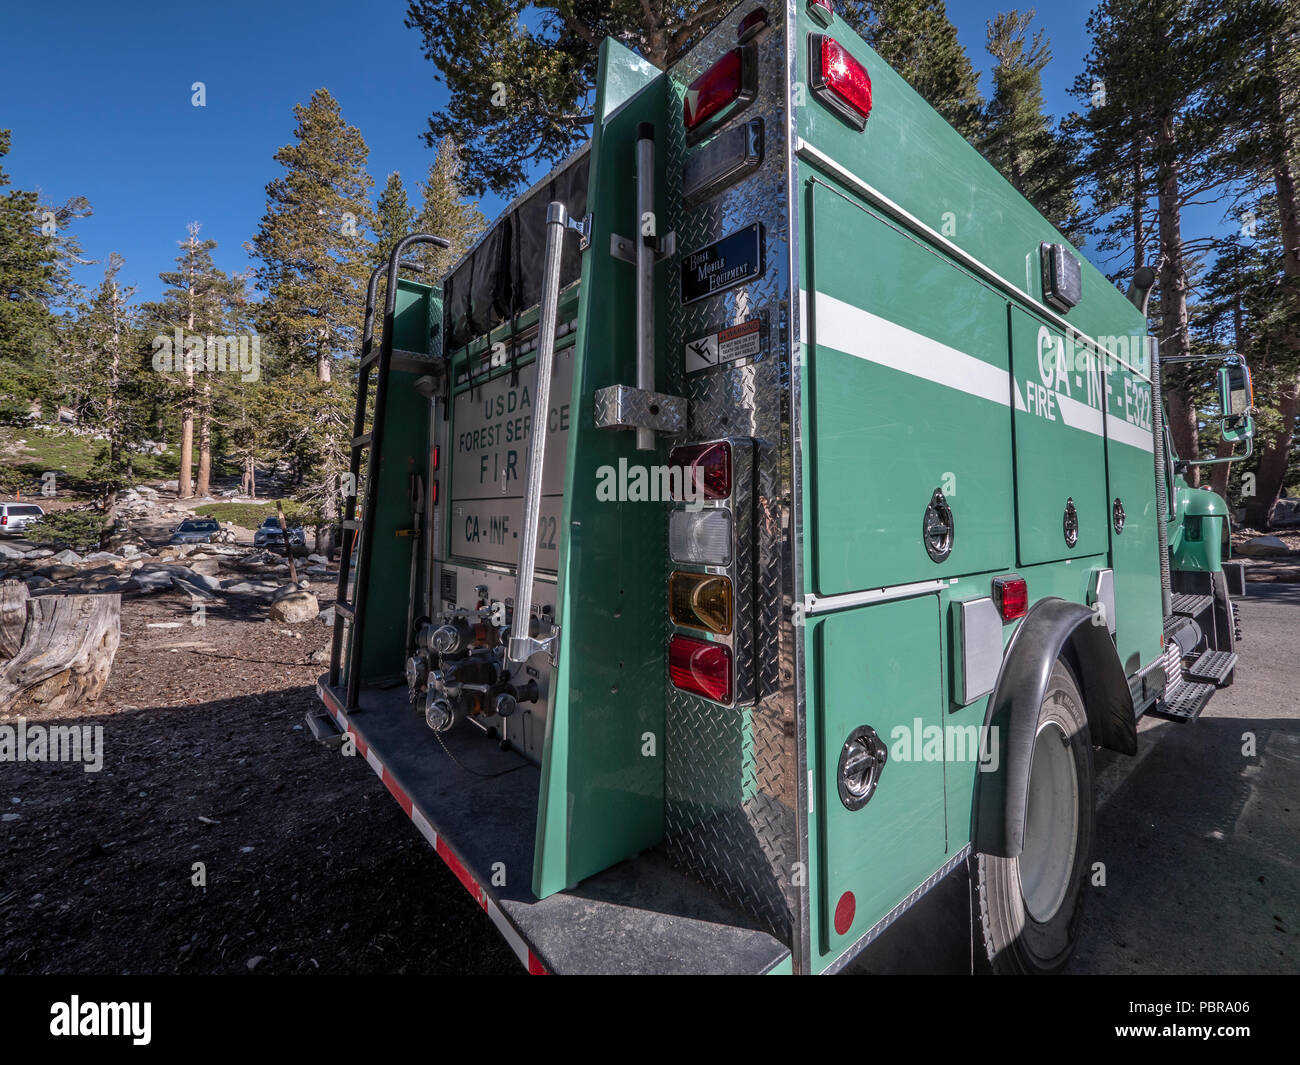 USDA Forest Service fire truck, Lake George, Mammoth Lakes, California. Stock Photo